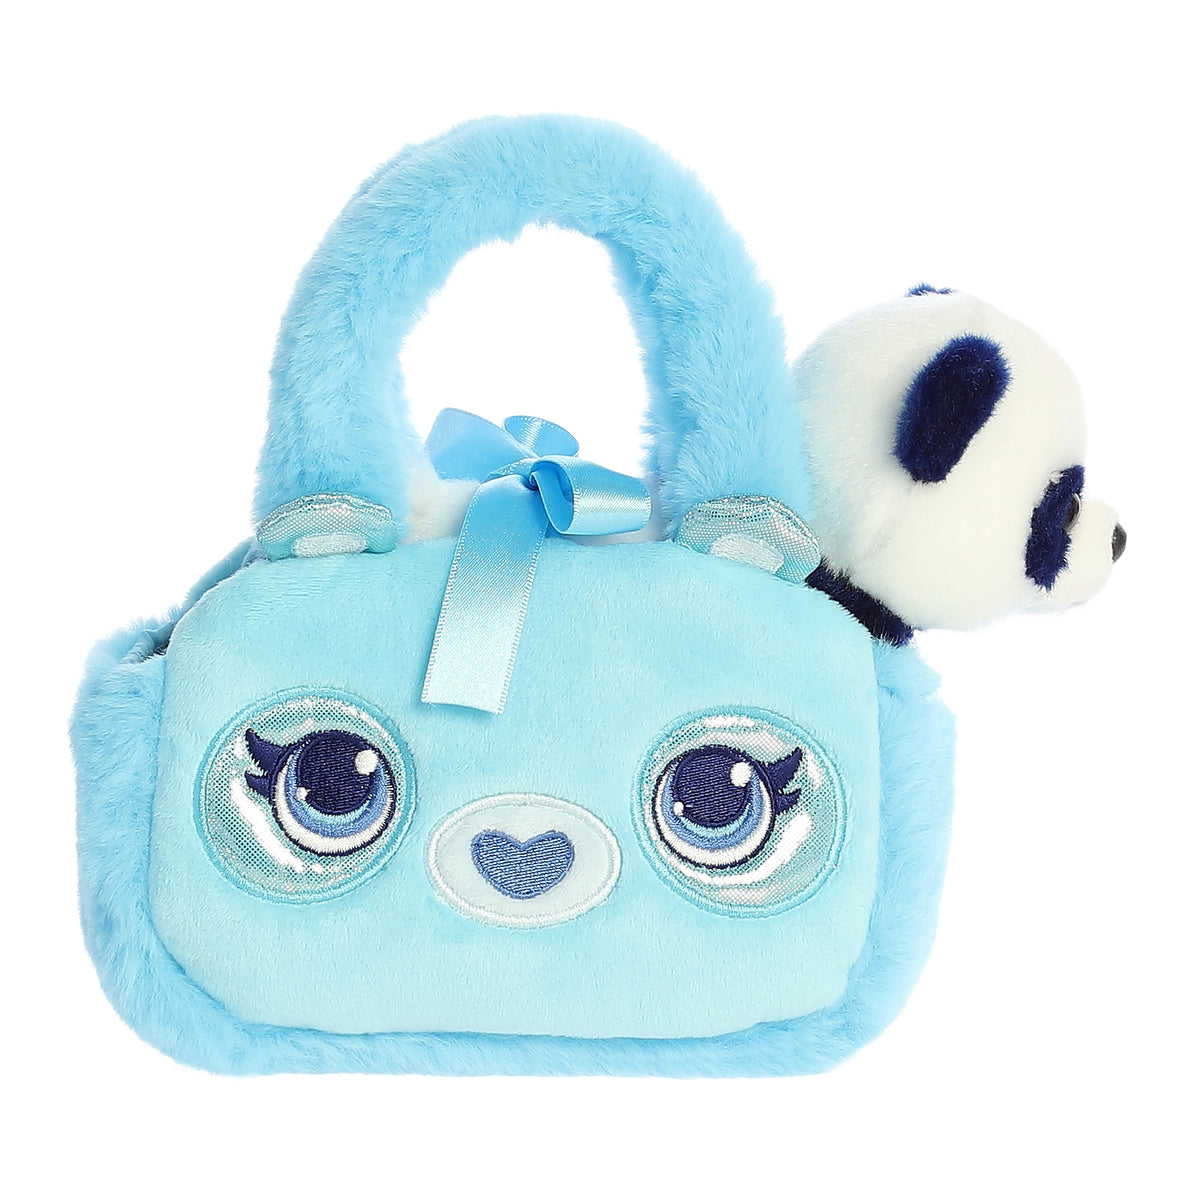 Electric blue Glitter Panda plush carrier from Aurora's Fancy Pals with a petite panda inside, ready for vibrant adventures.